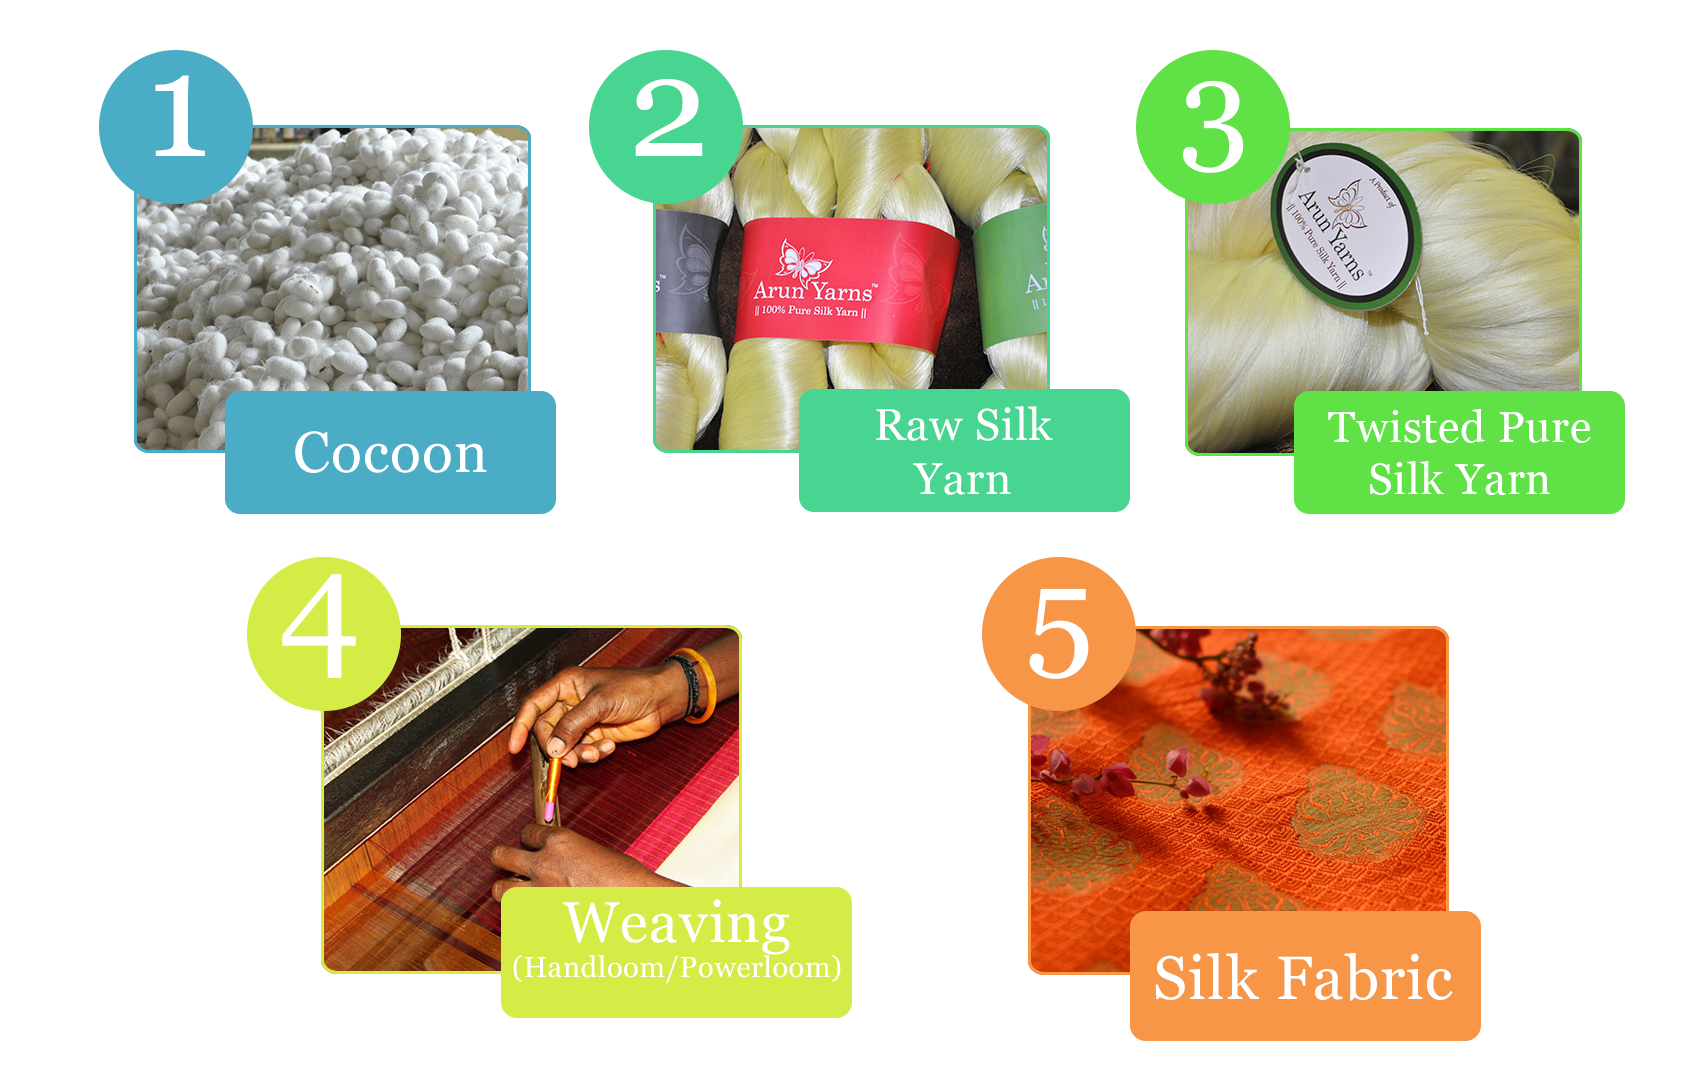 The process of making silk